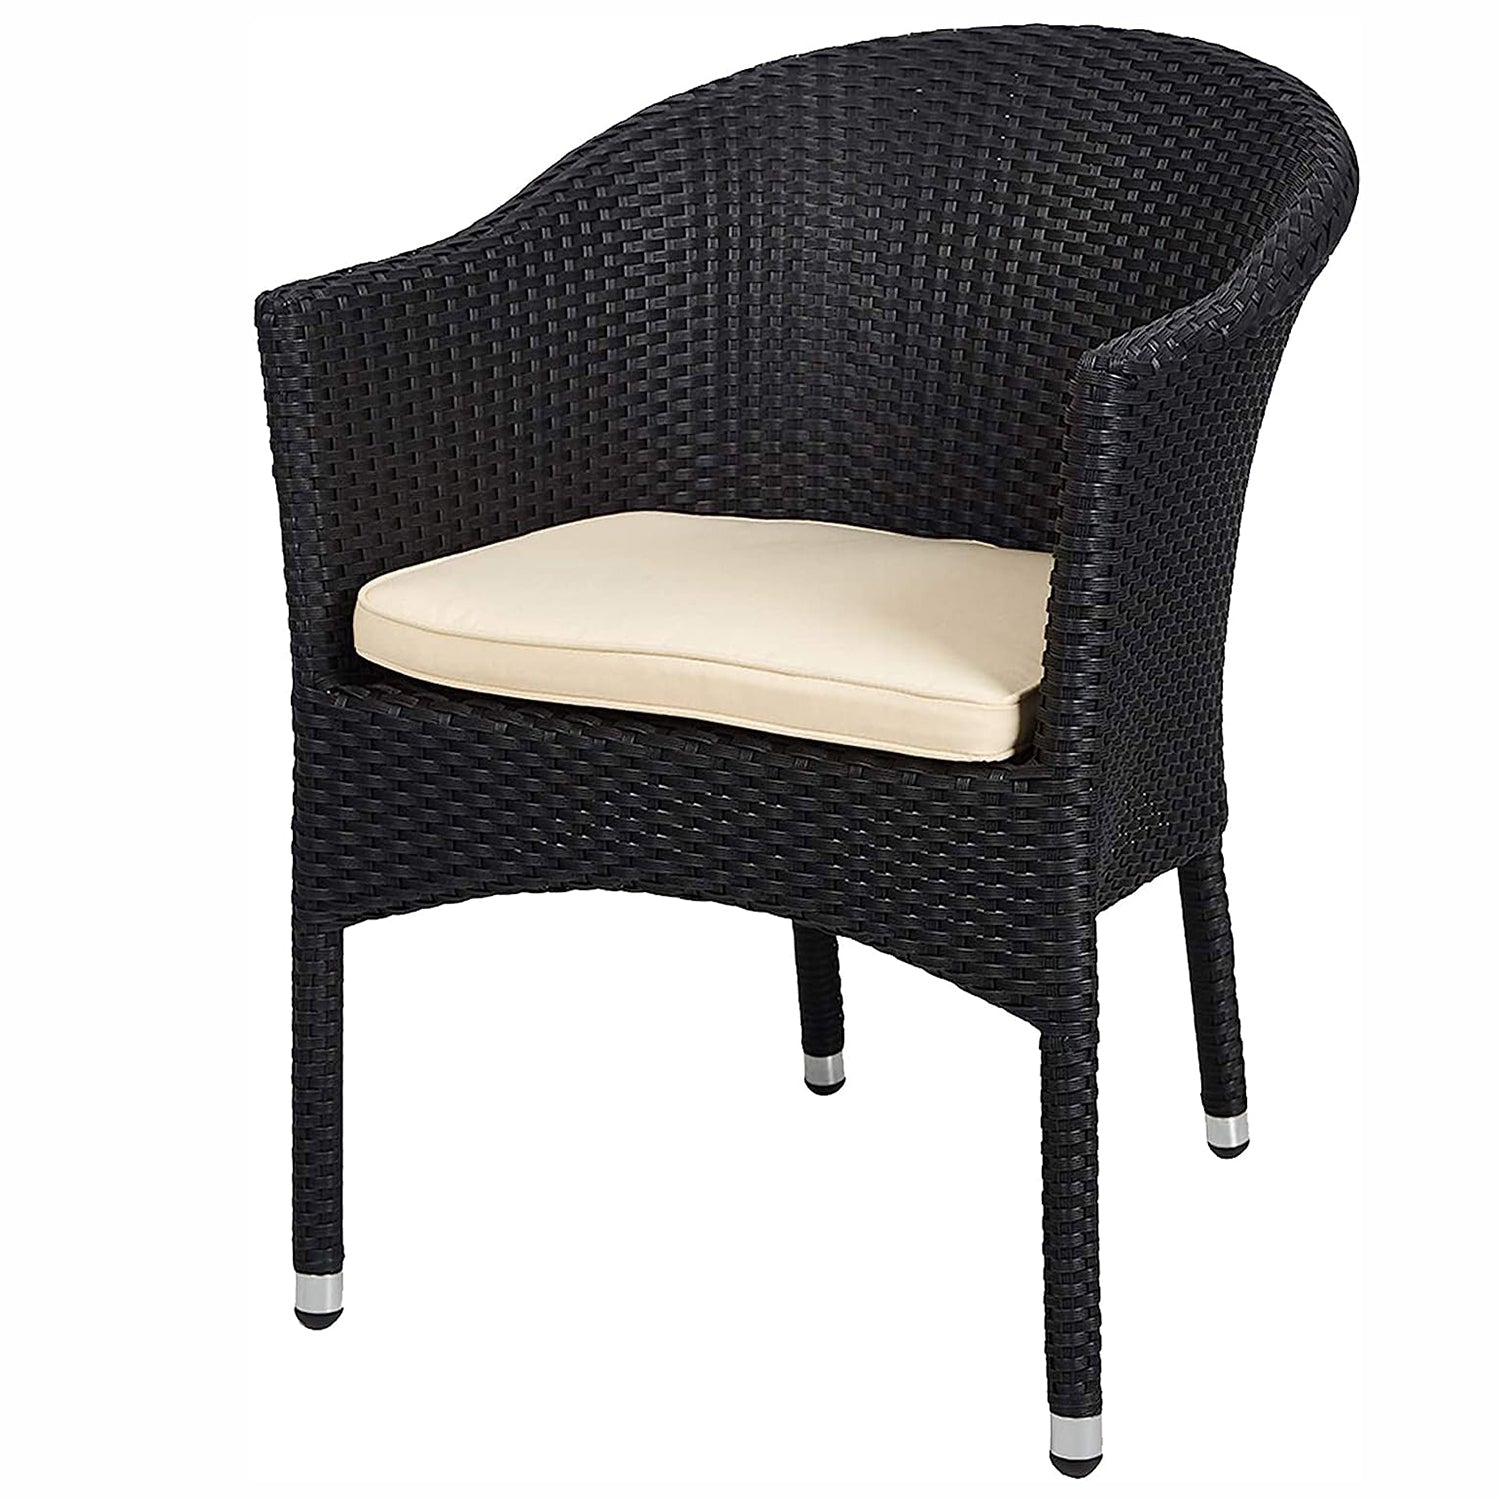 LUCKYERMORE Patio Rattan Chair Stackable Coffee Dining Wicker Chair with Cushions & Arm, Black